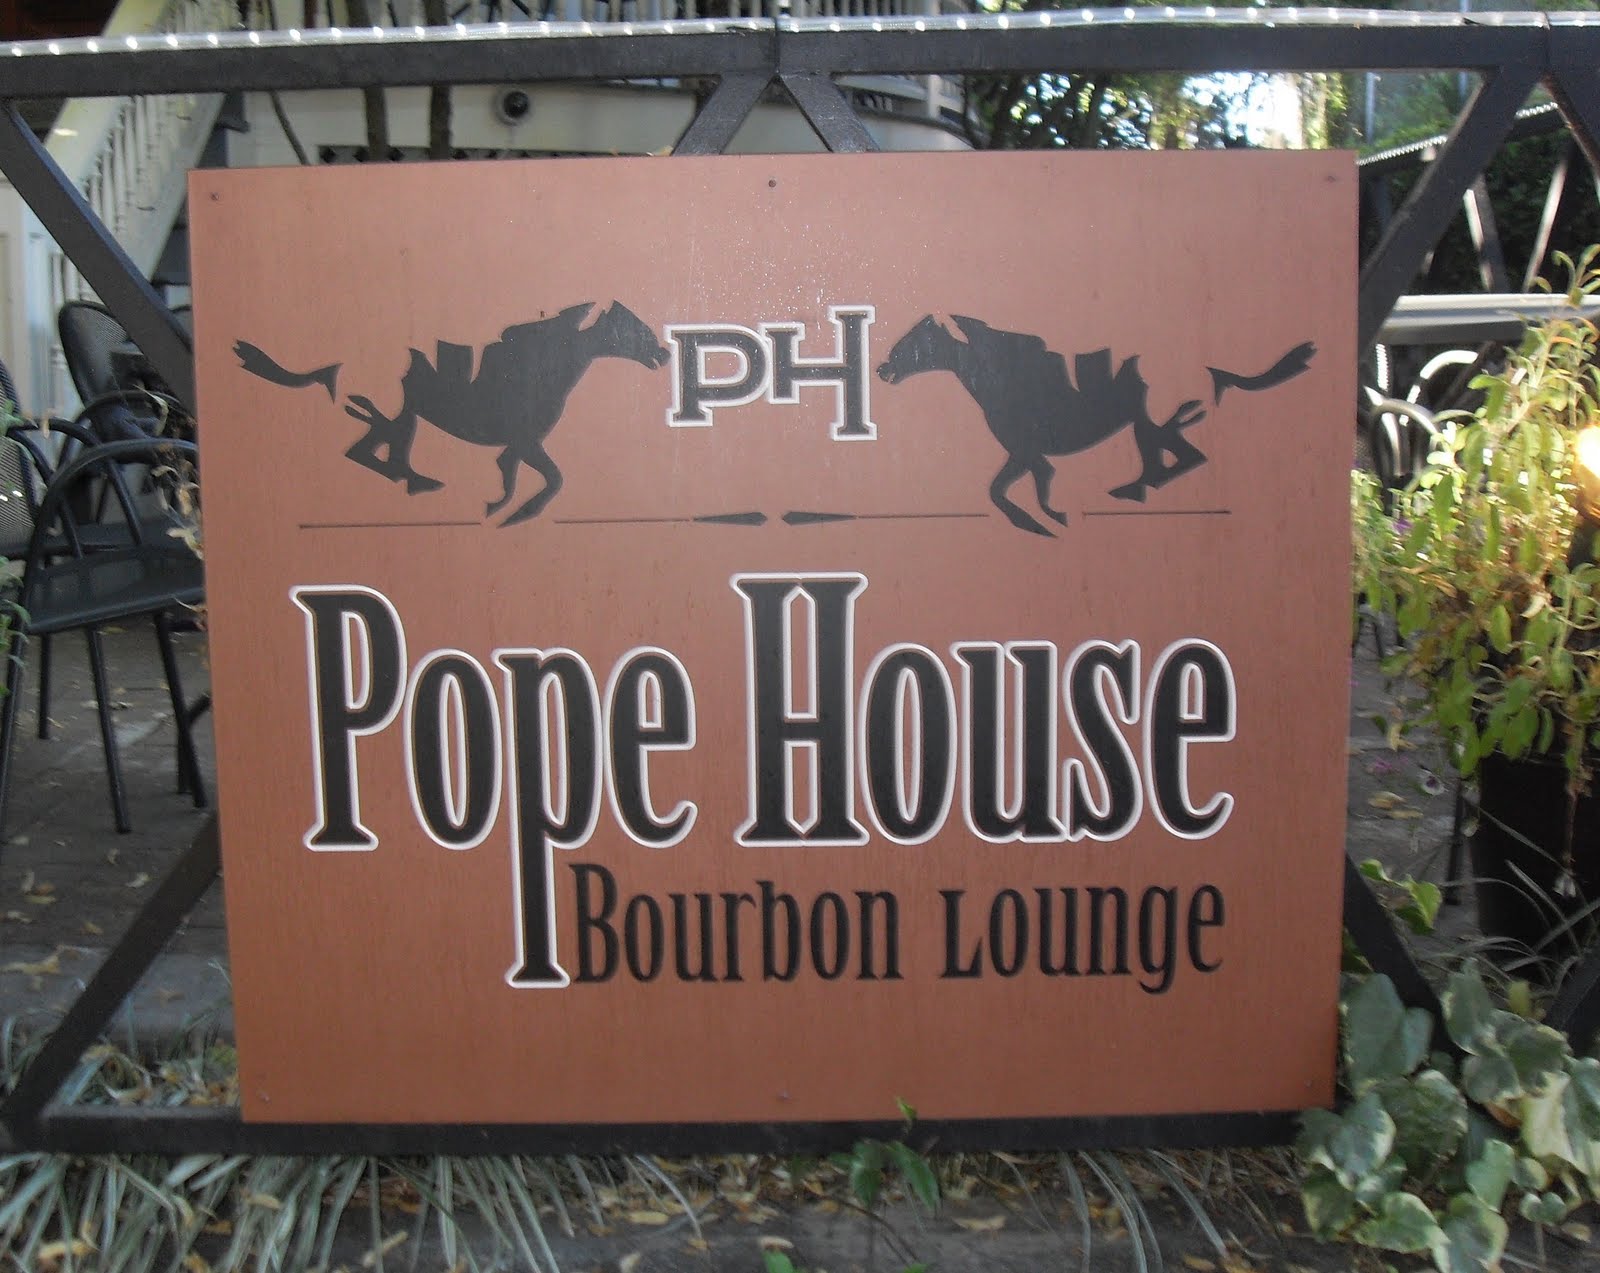 Pope House Bourbon Lounge, The